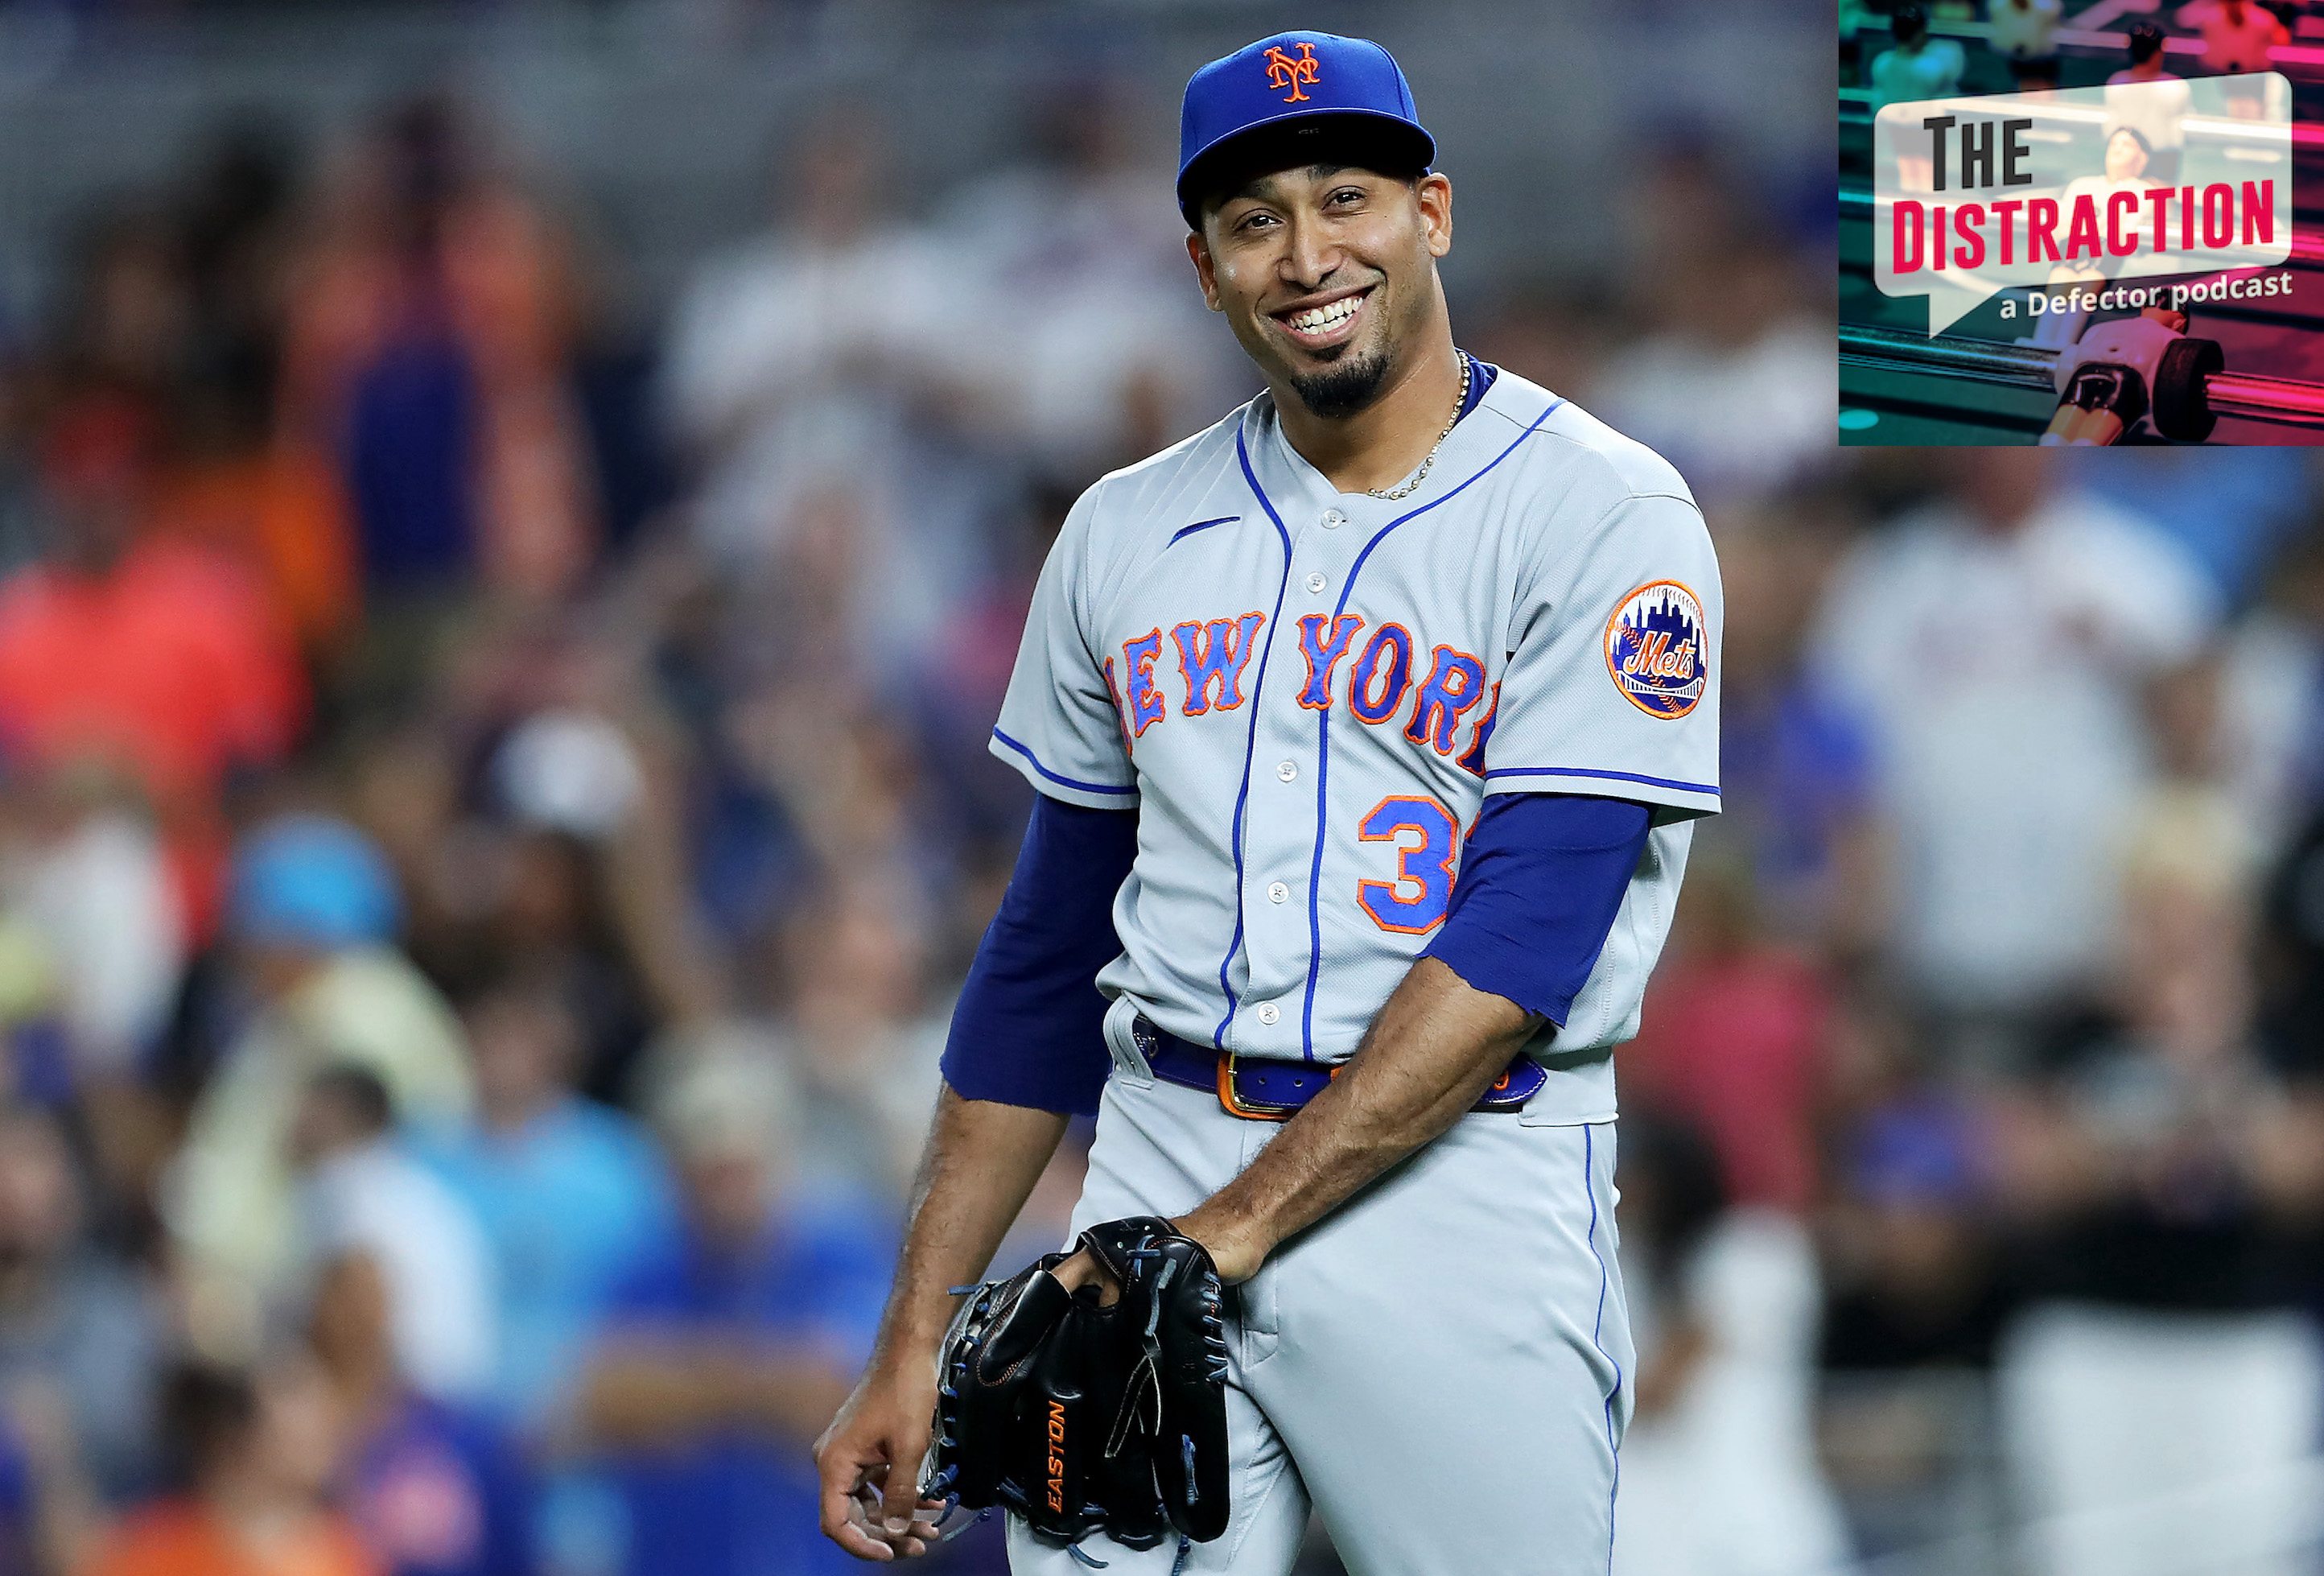 Mets closer Edwin Diaz, smiling on the mound during a save against the Marlins in July of 2022.